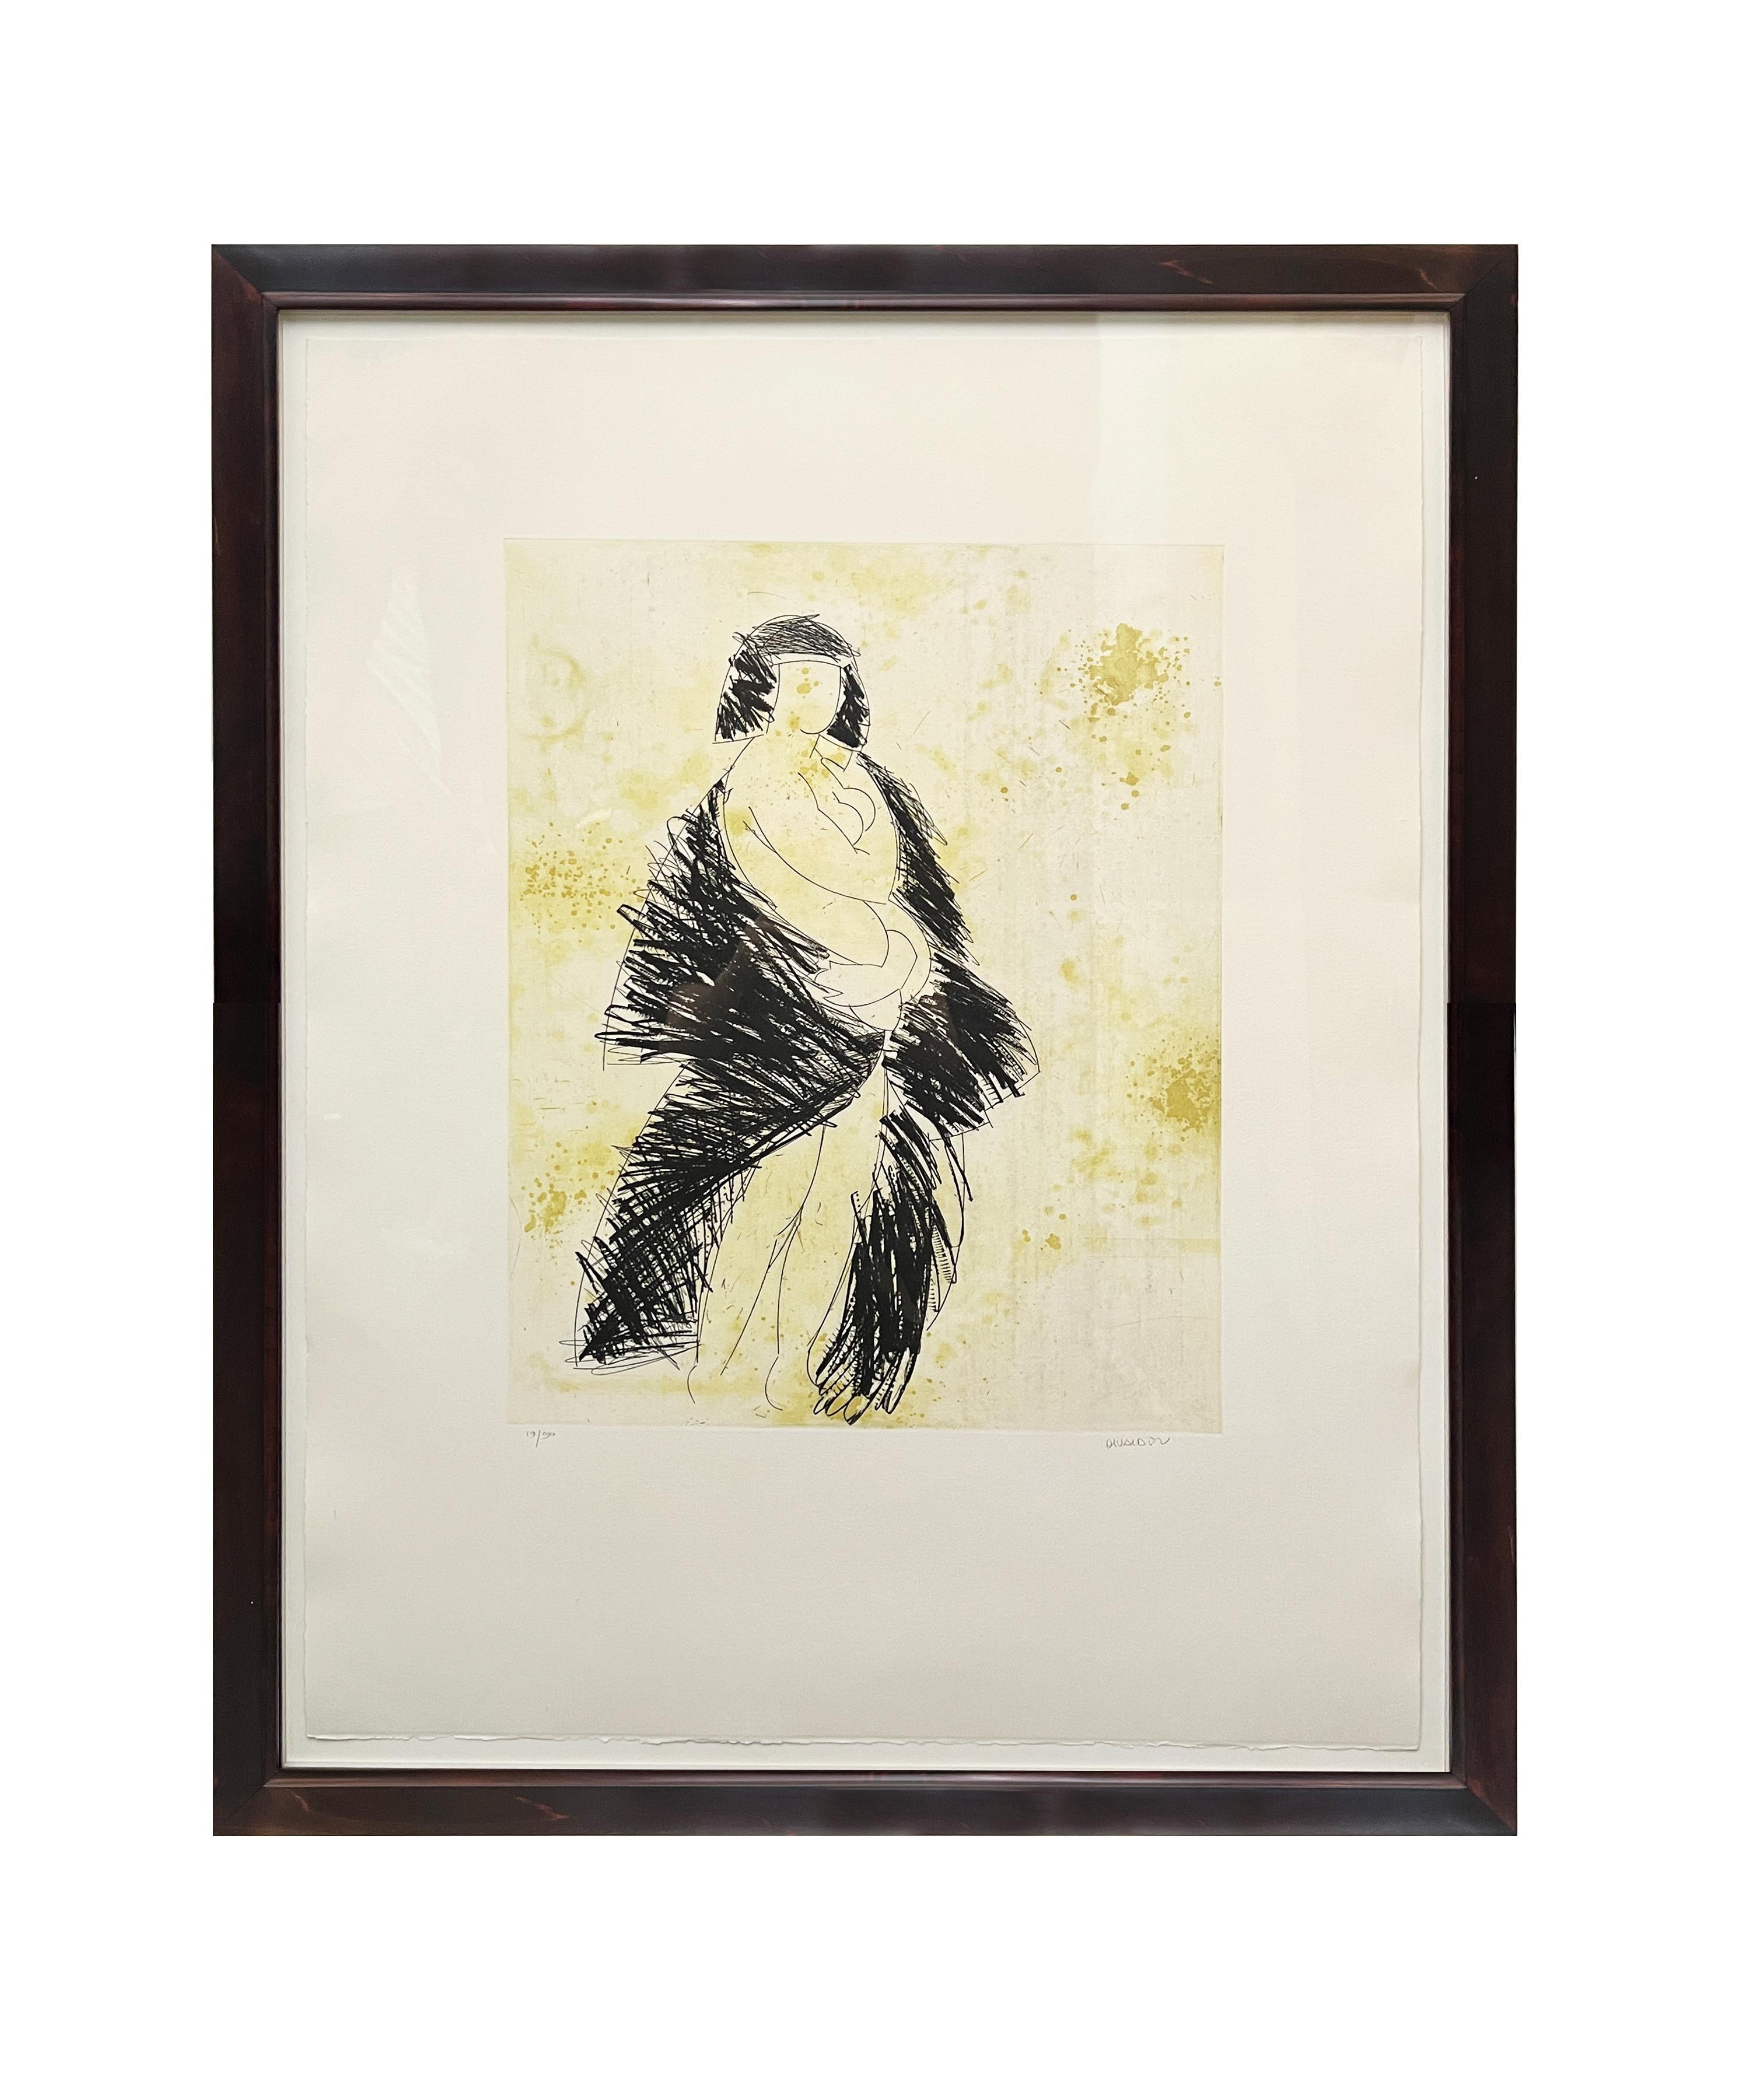 Etching by Manolo Valdes, depicting a naked silhouette of a woman covered by a black blanket. Manolo Valdes is one of few artists today who has successfully mastered the disciplines of drawing, painting, sculpture and printmaking. In each medium he